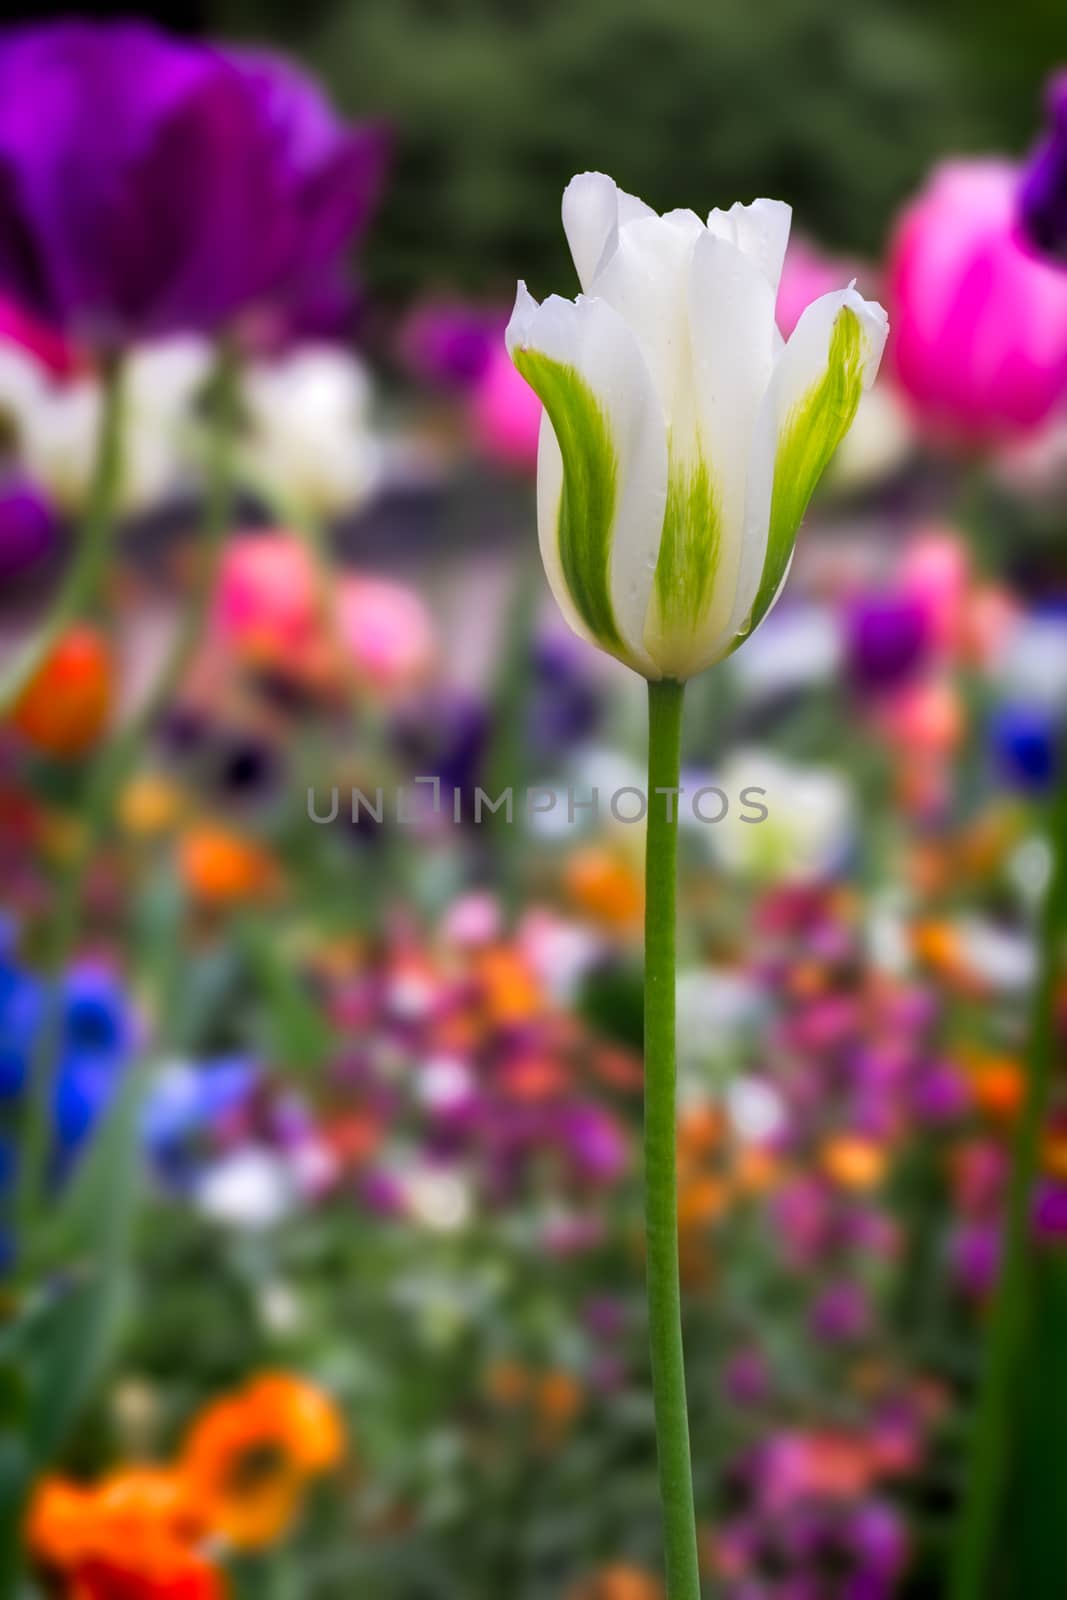 Colorful spring flower with tulip (lat. Tulipa)